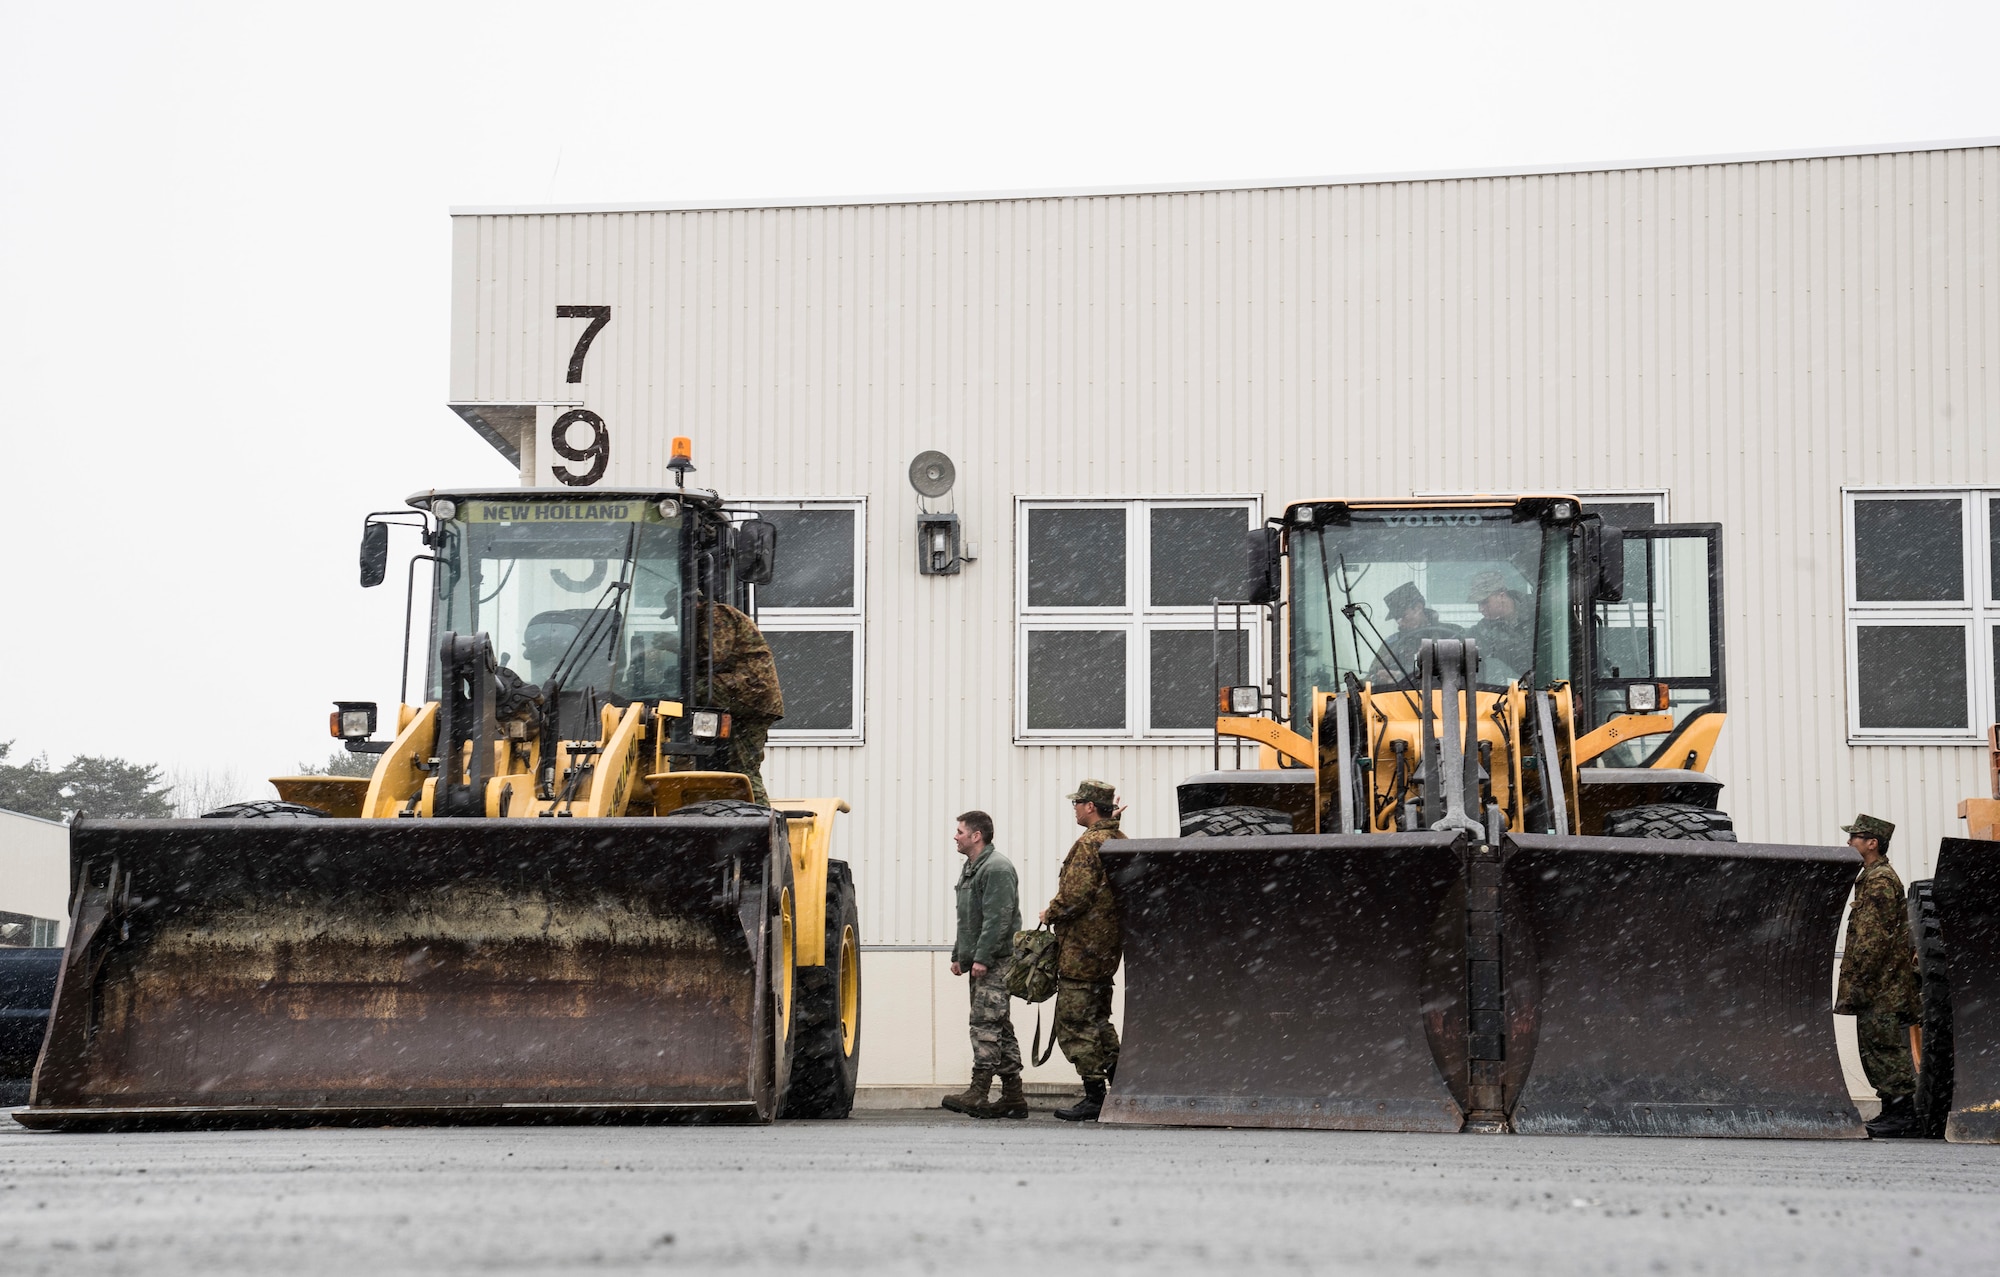 Japan Ground Self-Defense Force Soldiers from the 1st Training Unit at Camp Higashi-Chitose, Hokkaido, Japan, tour a front end loader and a v-plow with U.S. Air Force Airmen with the 35th Civil Engineer Squadron at Misawa Air Base, Japan, March 5, 2018,. Misawa AB works with JGSDF Soldiers to complete their basic English course final evaluation by attending a career field exchange with their U.S. Air Force counterparts practicing military English terms. The course, held at Camp Higashi-Chitose, Hokkaido, Japan, enhances future bilateral missions and enables seamless execution by breaking down social barriers. (U.S. Air Force photo by Senior Airman Sadie Colbert)